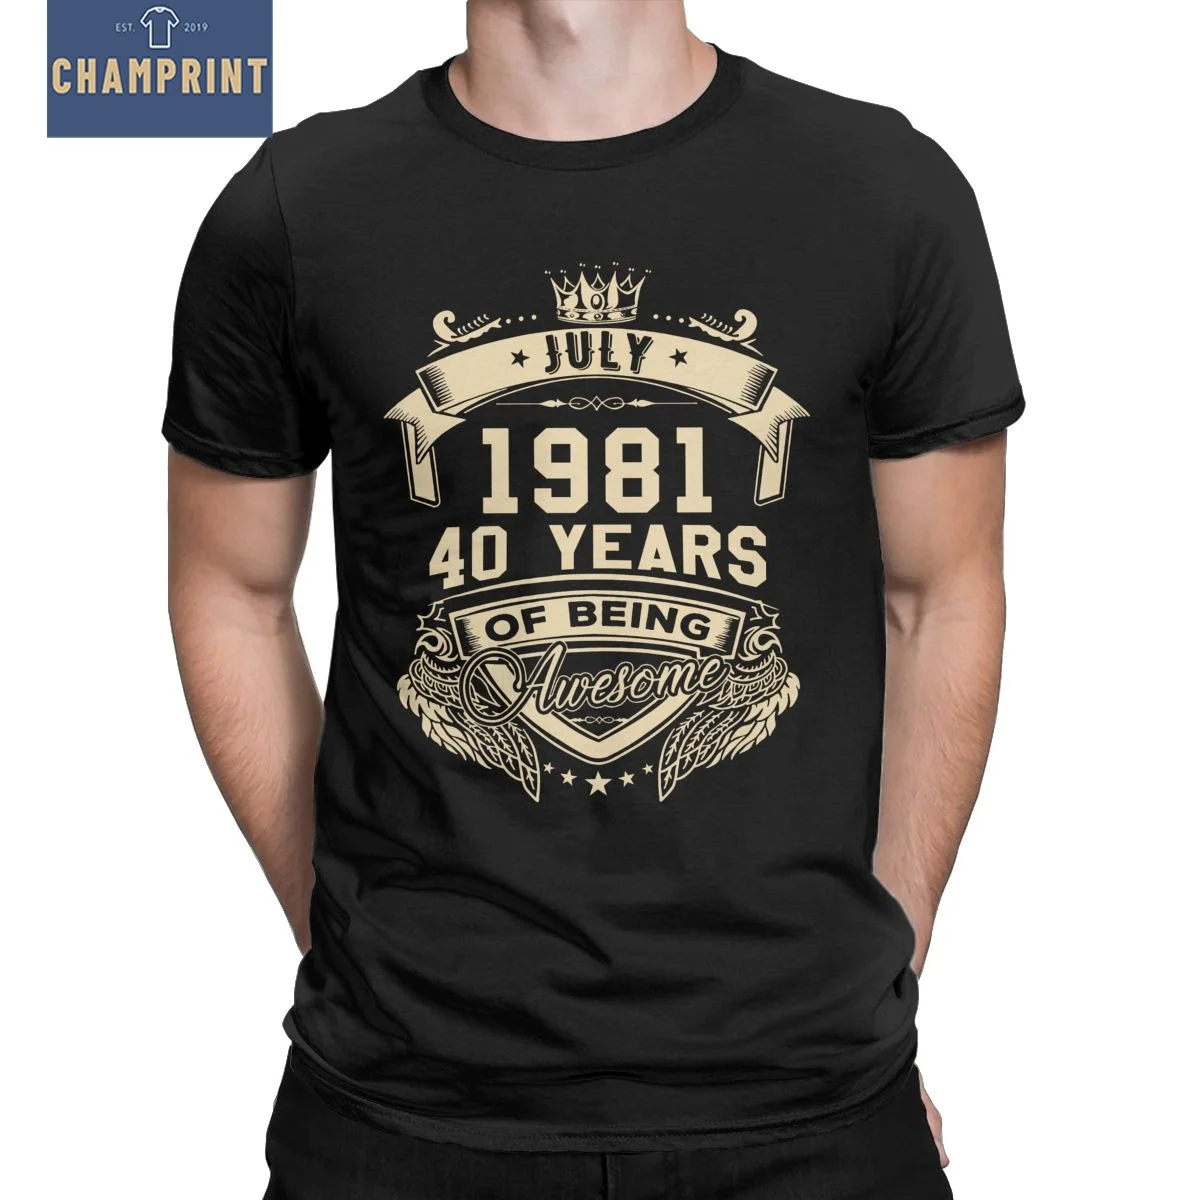 

Born In July 1981 40 Years Of Being Awesome Limited T Shirts for Men Cotton T-Shirt 40th Birthday Tee Shirt 4XL 5XL 6XL Clothing